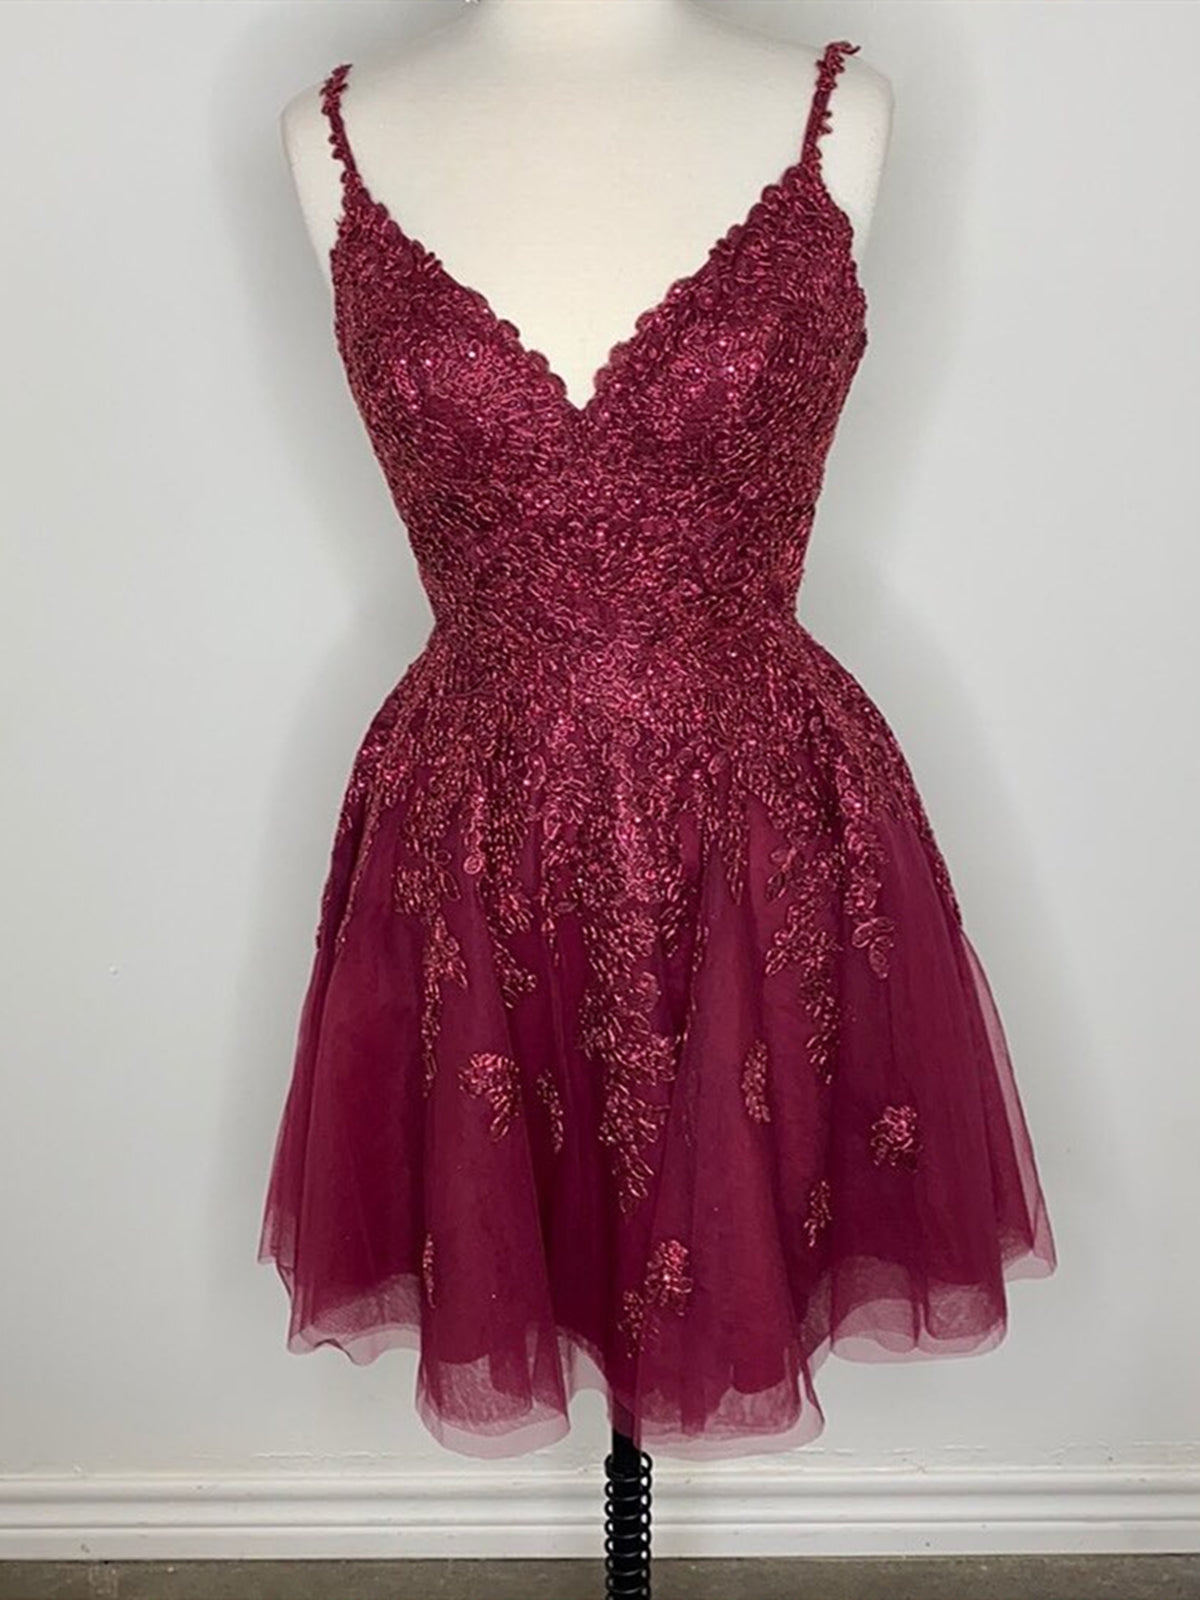 Formal Dresses Ball Gown, Short V Neck Burgundy Lace Prom Dresses, Short Wine Red Lace Homecoming Graduation Dresses